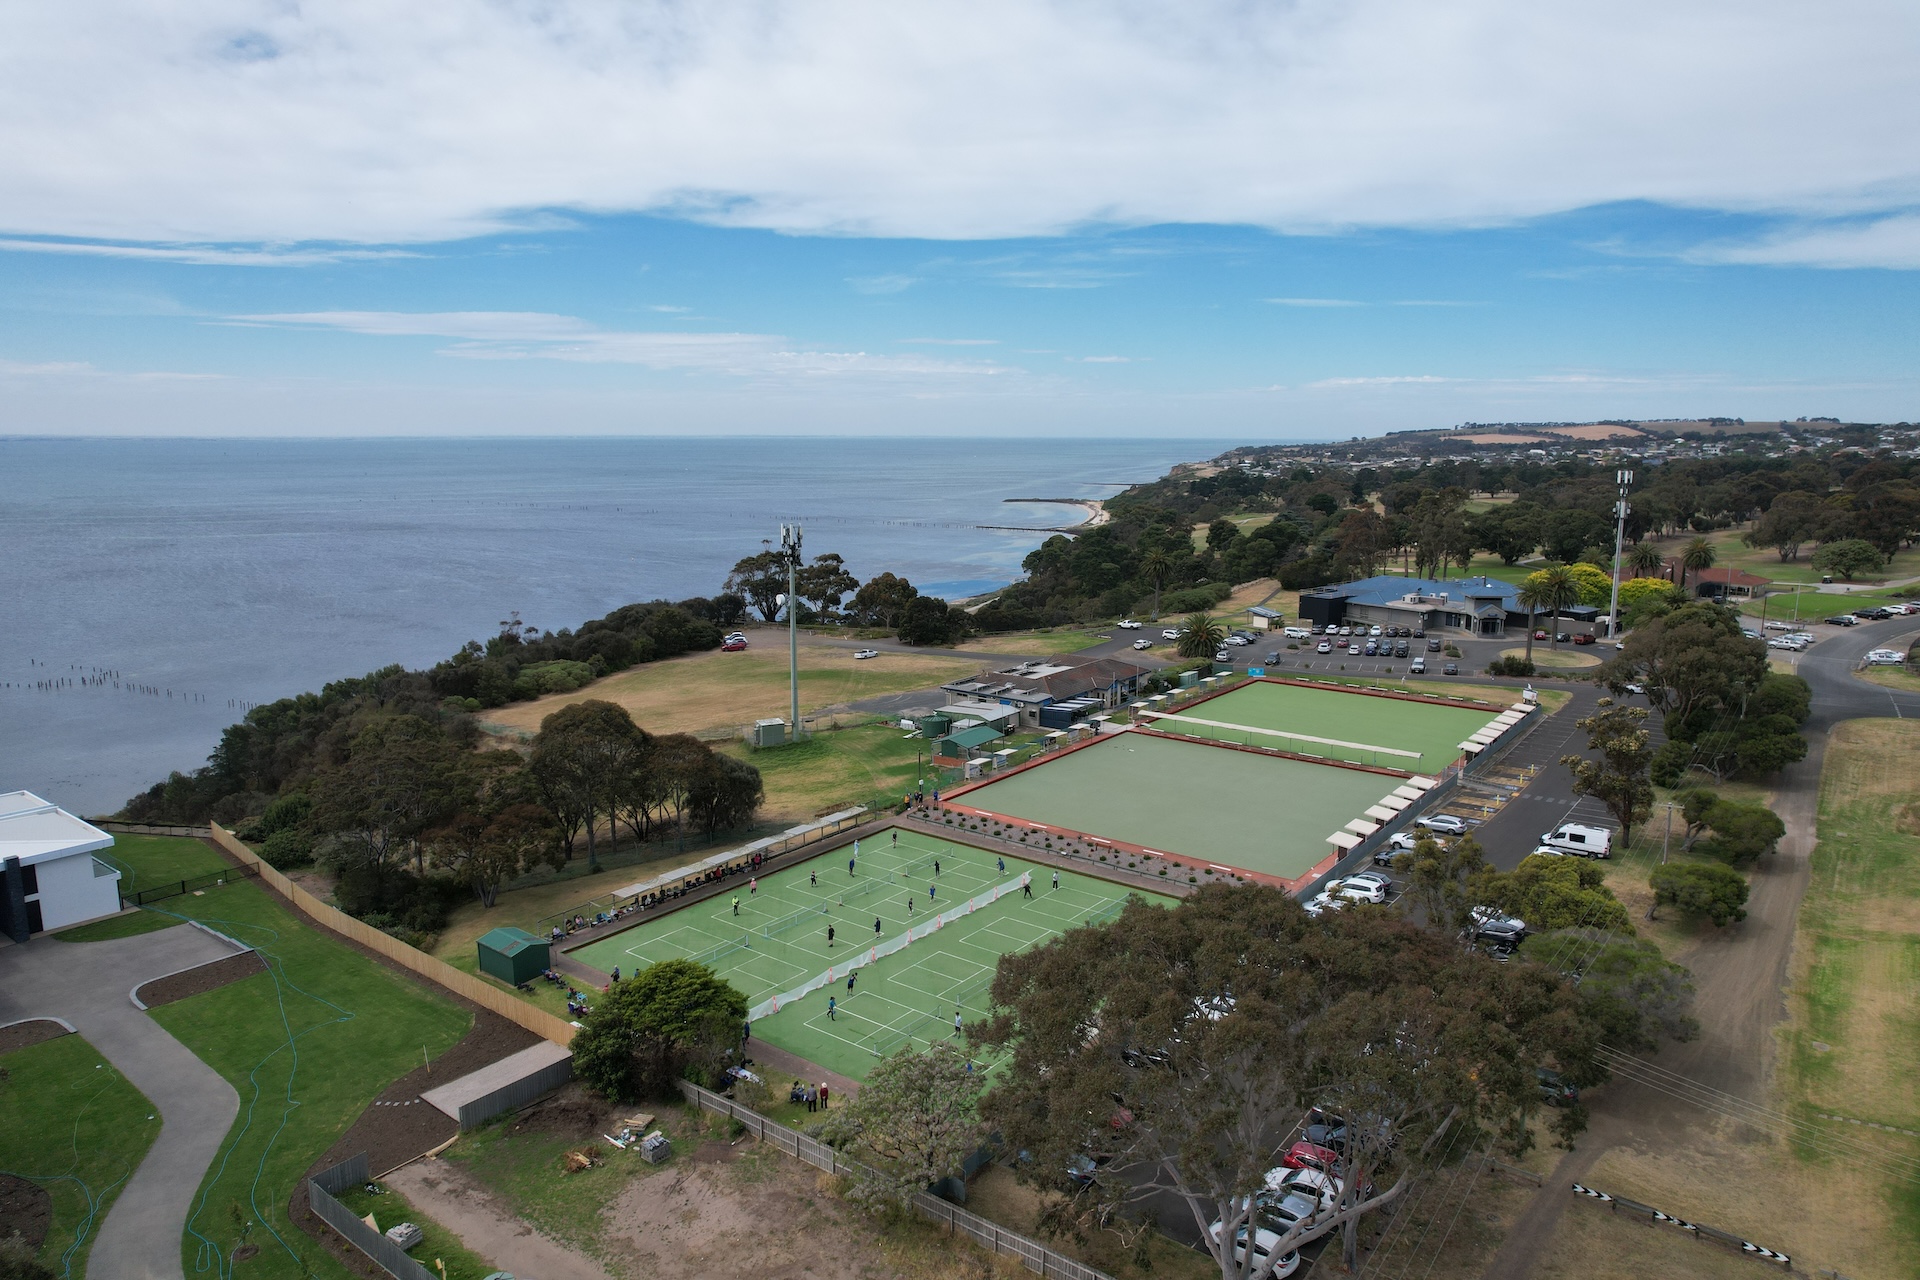 Outdoor Courts in Clifton Springs with a view of the Bay